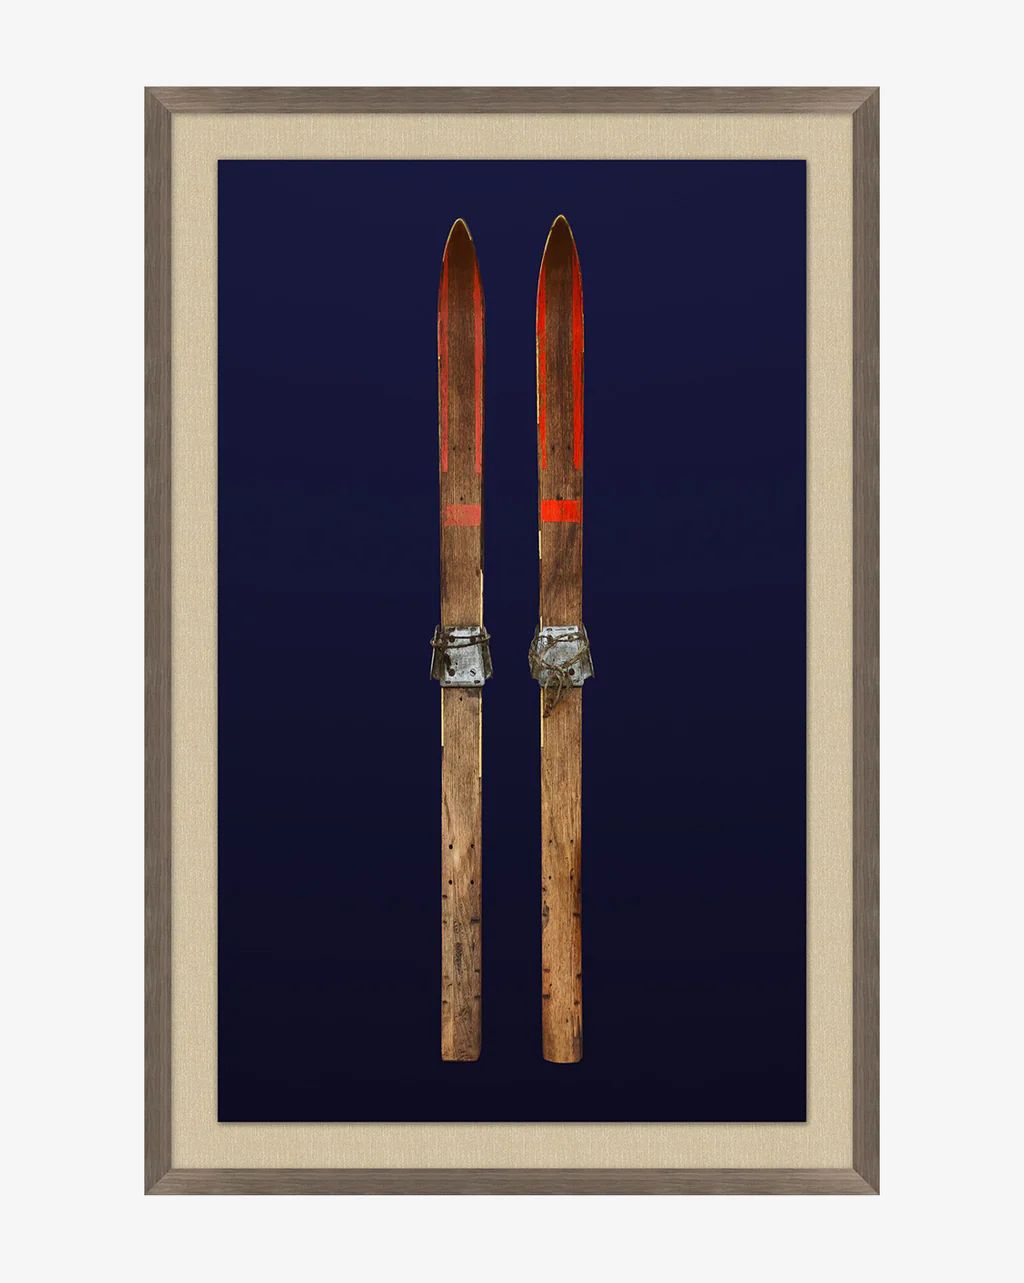 Antique Navy Skis I | McGee & Co.